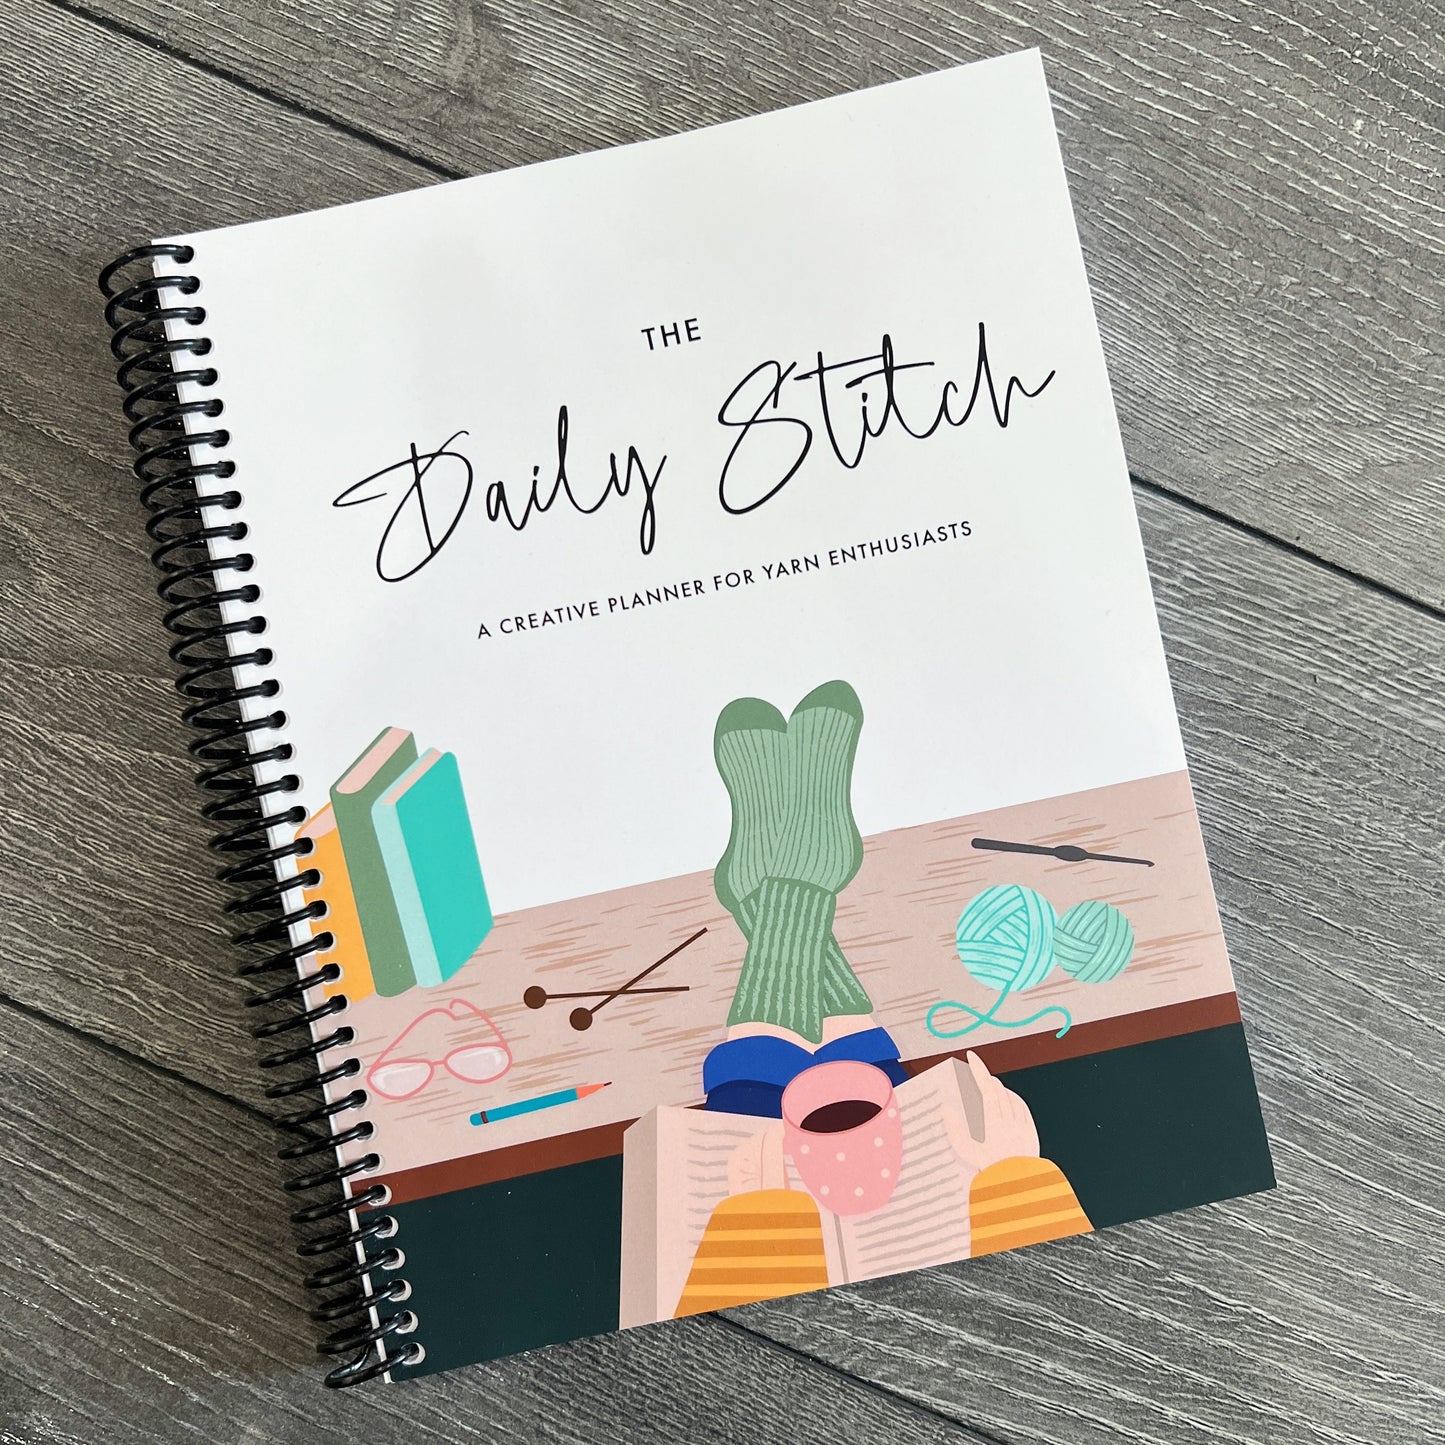 The Daily Stitch | Knitting Tracker Stickers